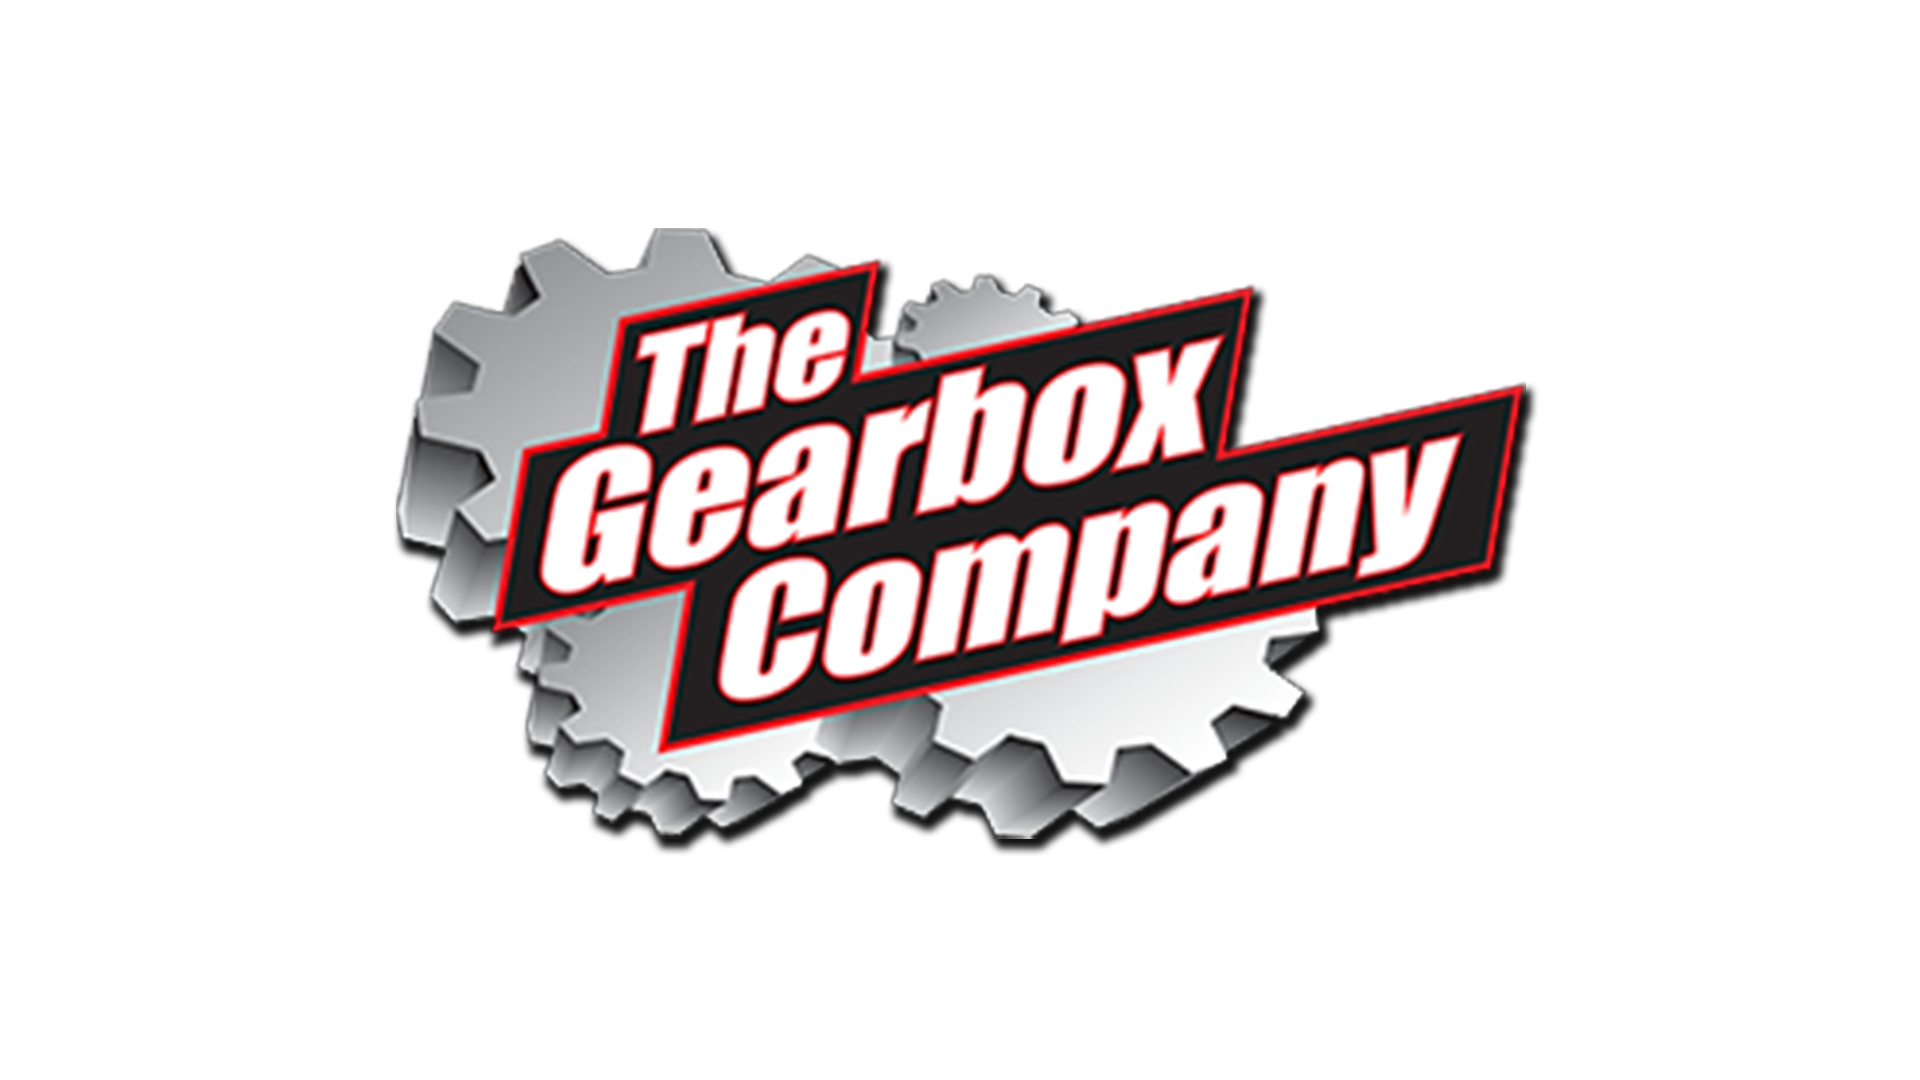 The Gearbox Company